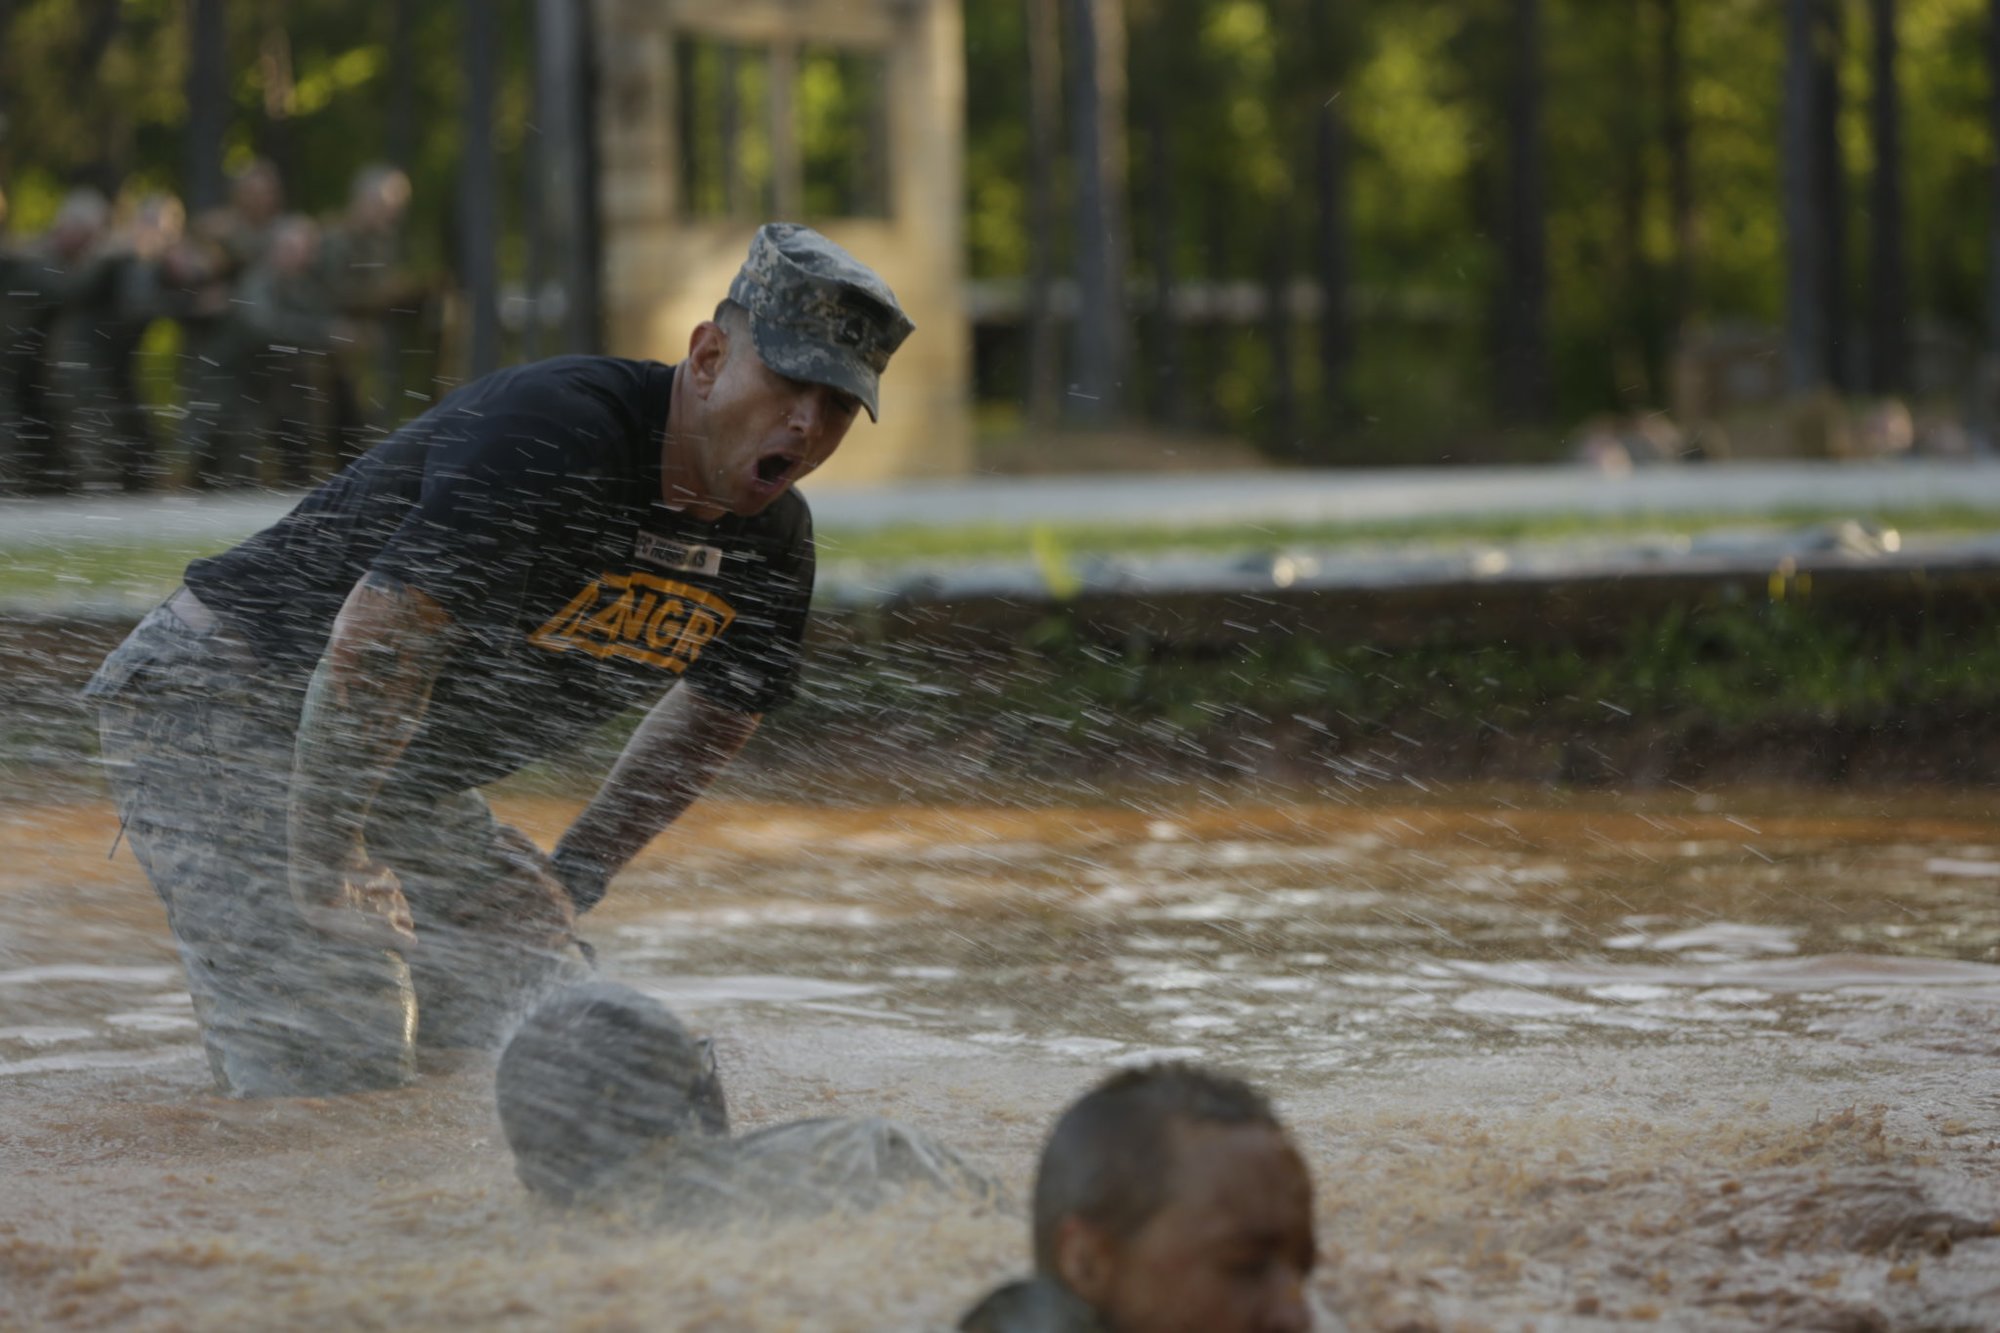 A U.S. Army Ranger School instructor calls out commands to Soldiers during the Ranger Course on Fort Benning, Ga., April 21, 2015. Photo by Sgt. Paul Sale, courtesy of U.S. Army.